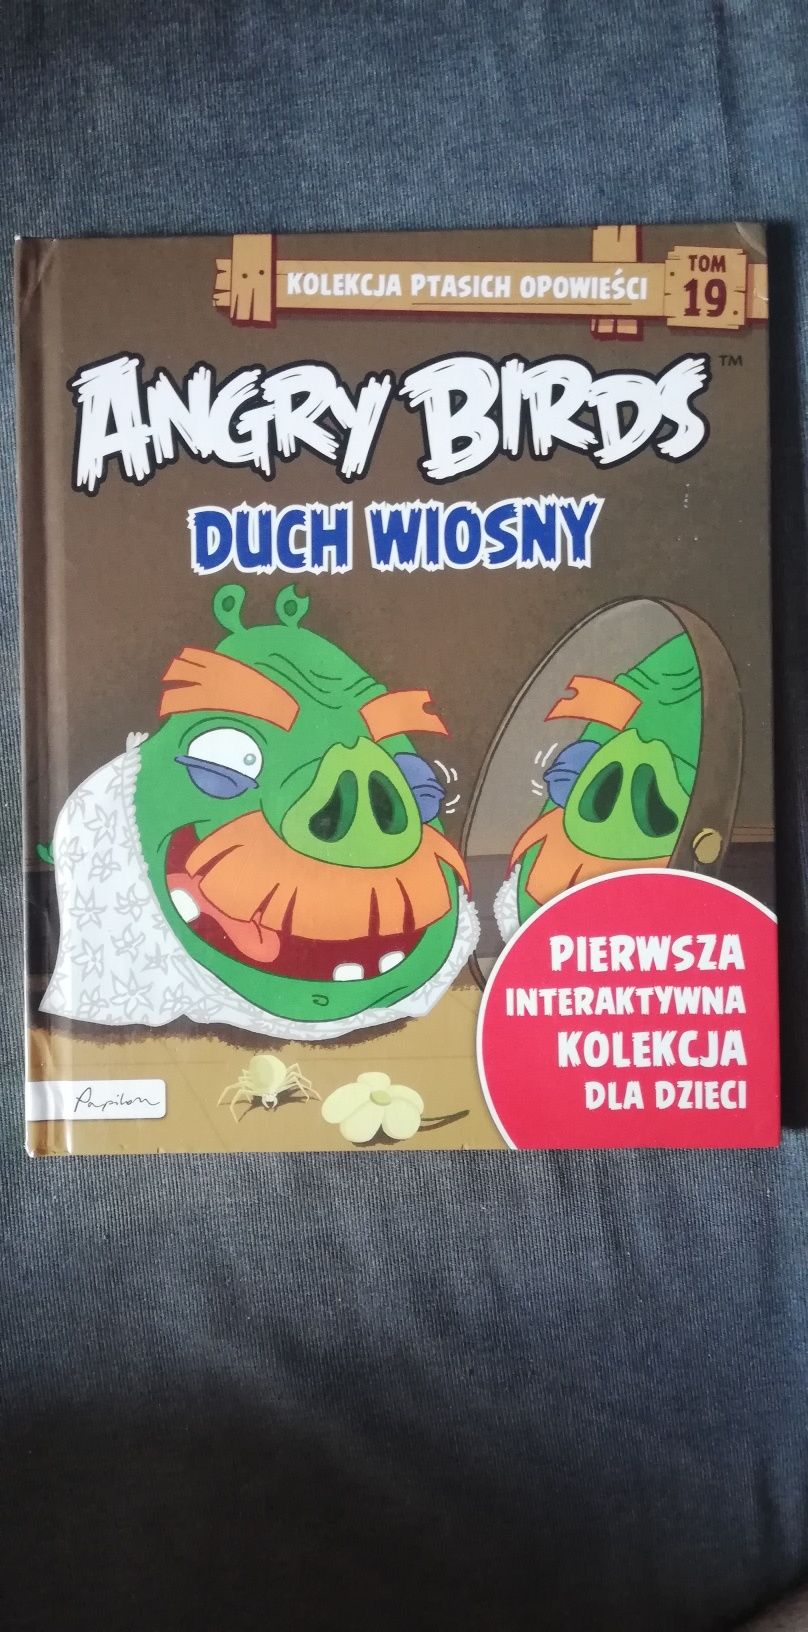 Angry Birds duch wiosny